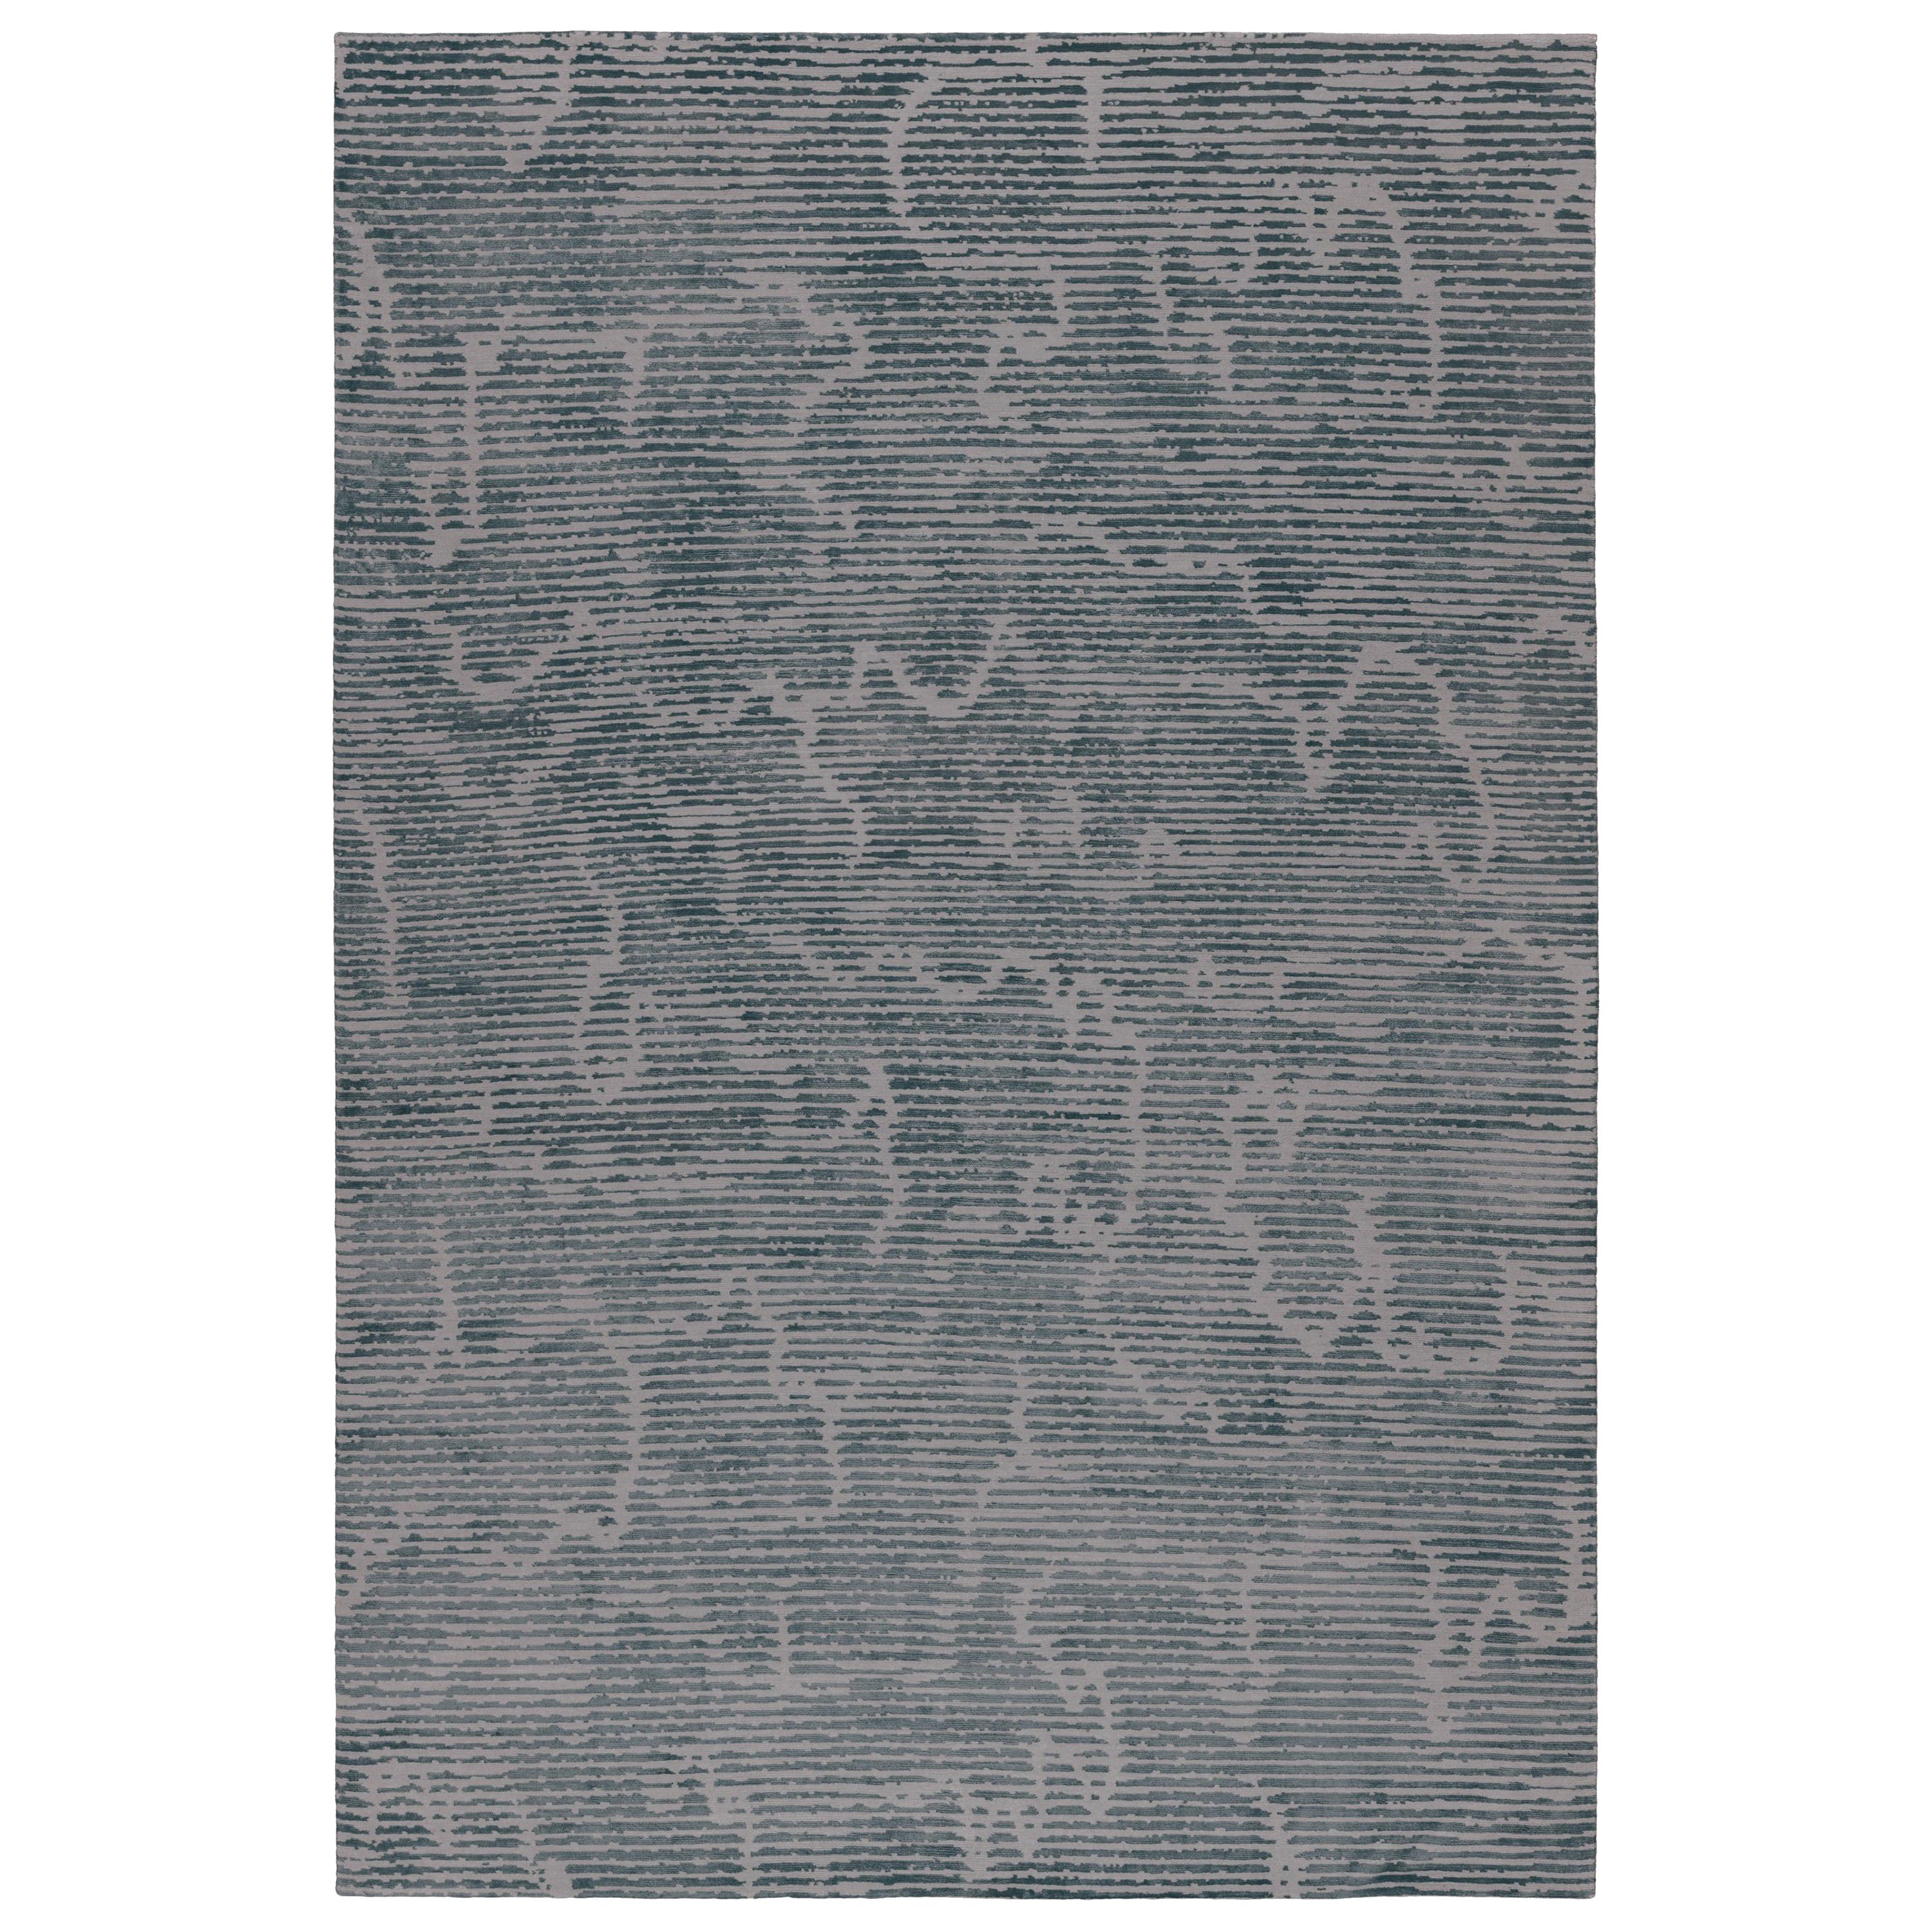 Staccato Steel Hand-Knotted 14x10 Rug in Wool and Silk by Kelly Wearstler